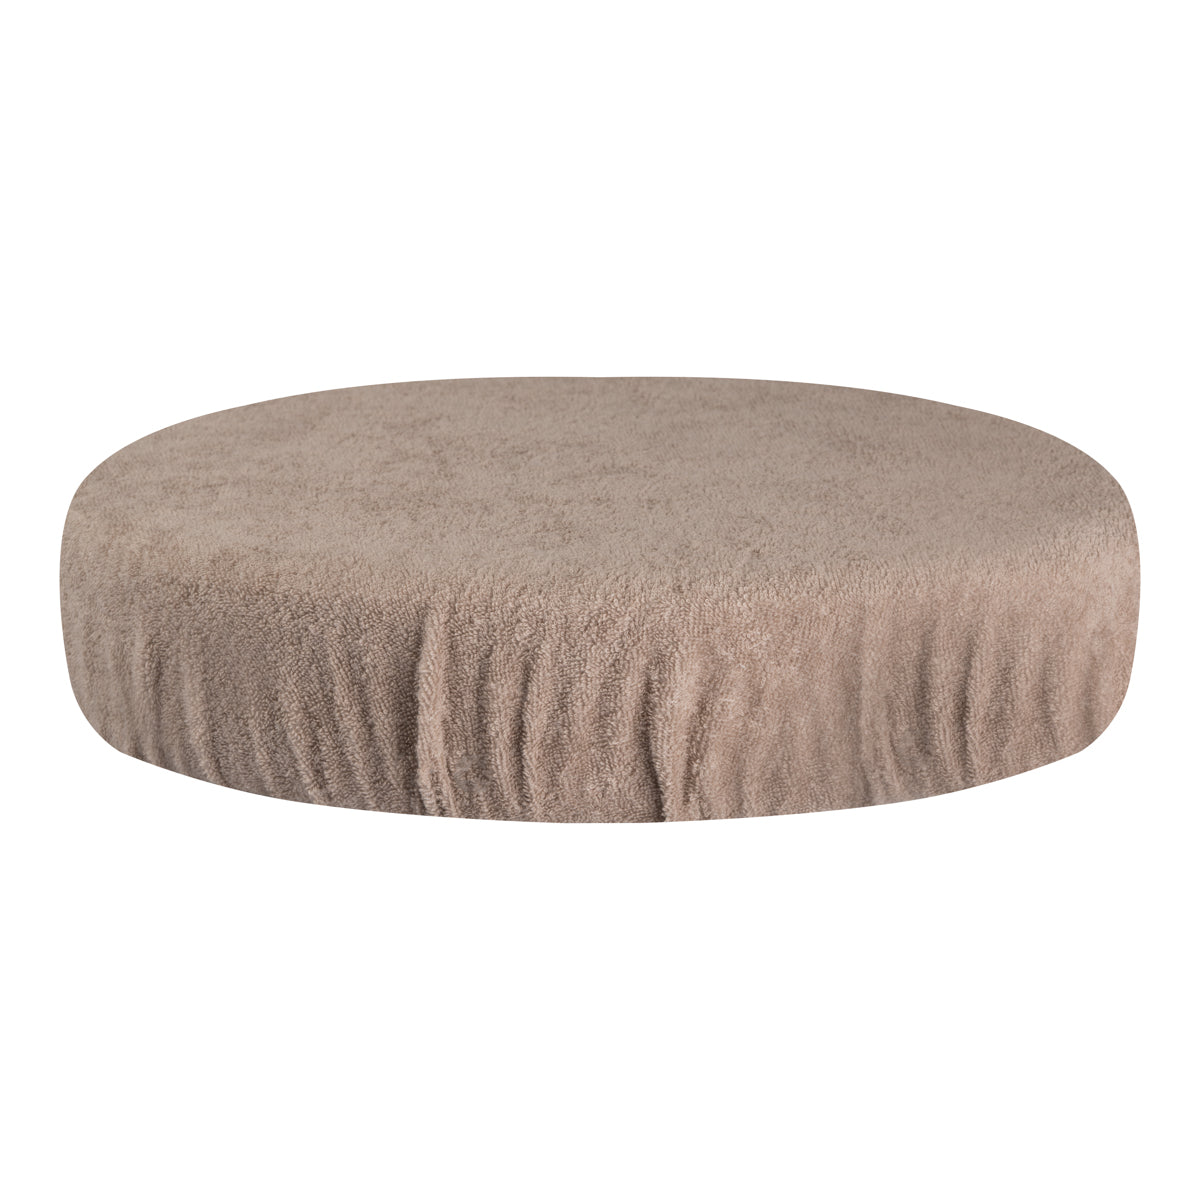 TERRY COVER FOR STOOL BEIGE